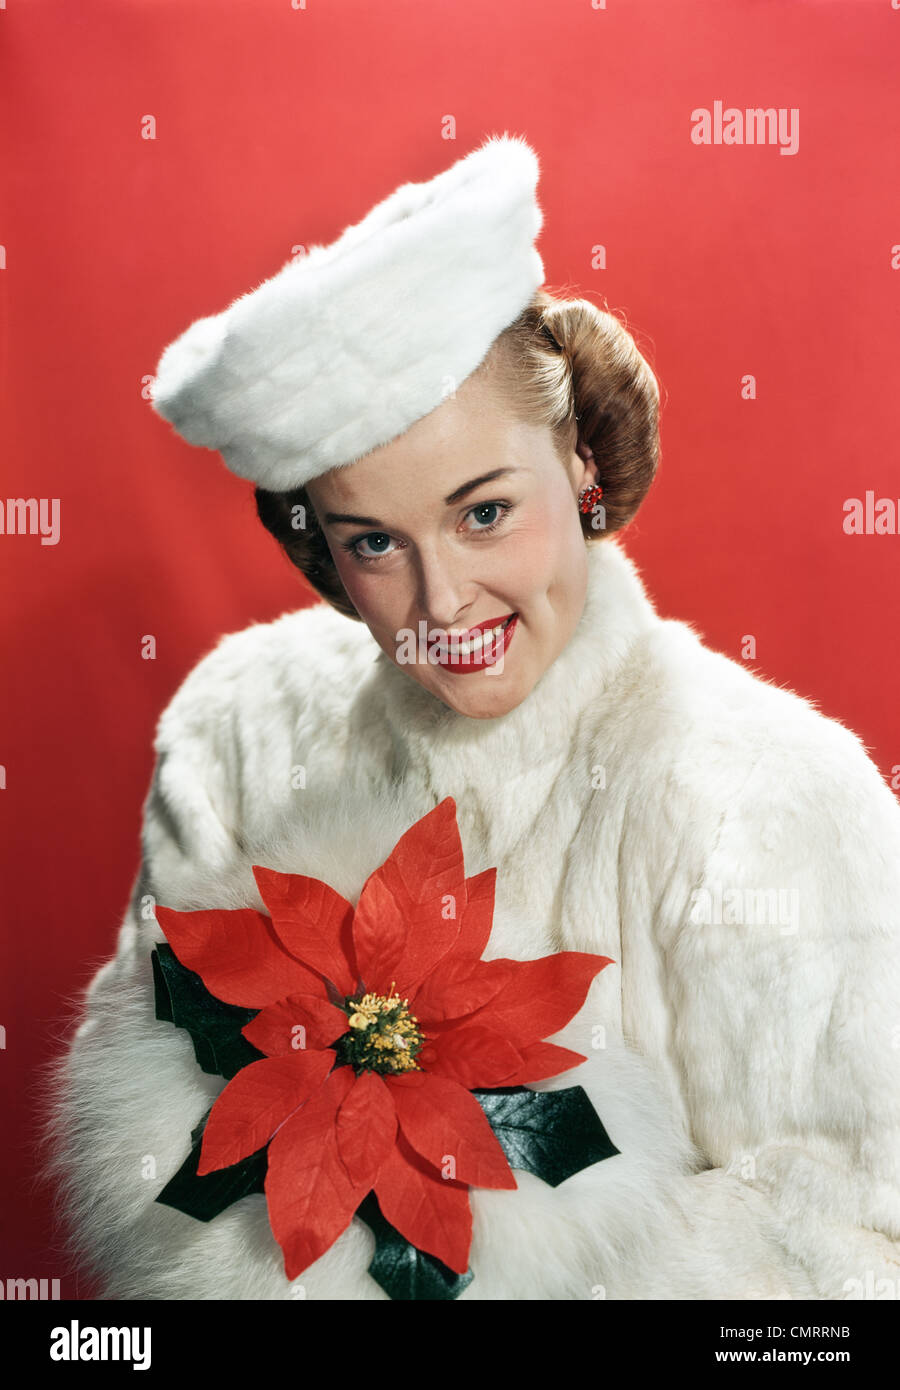 1940s PORTRAIT SMILING WOMAN WEARING WHITE FUR OVERCOAT AND HAT HOLDING POINSETTIA LOOKING AT CAMERA Stock Photo